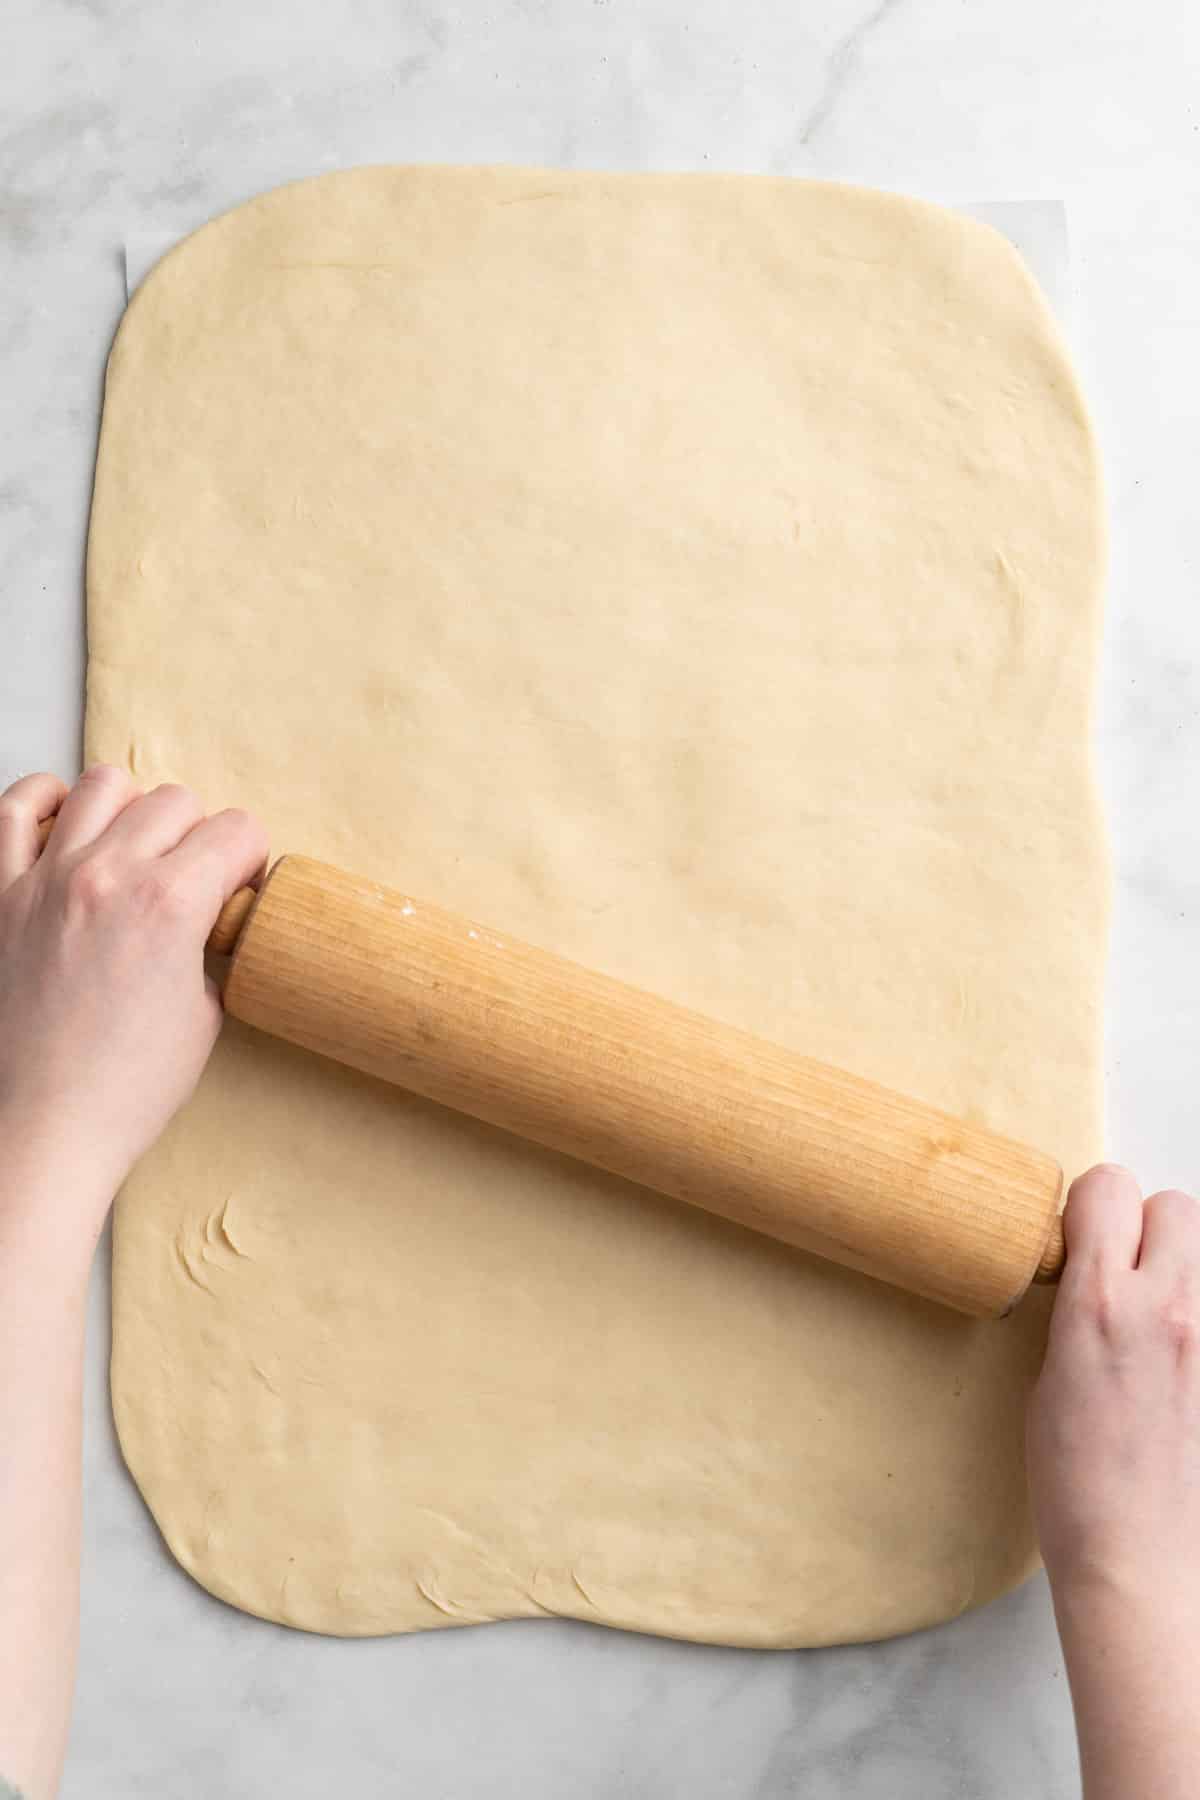 Using a rolling pin to roll dough into a rectangle shape.